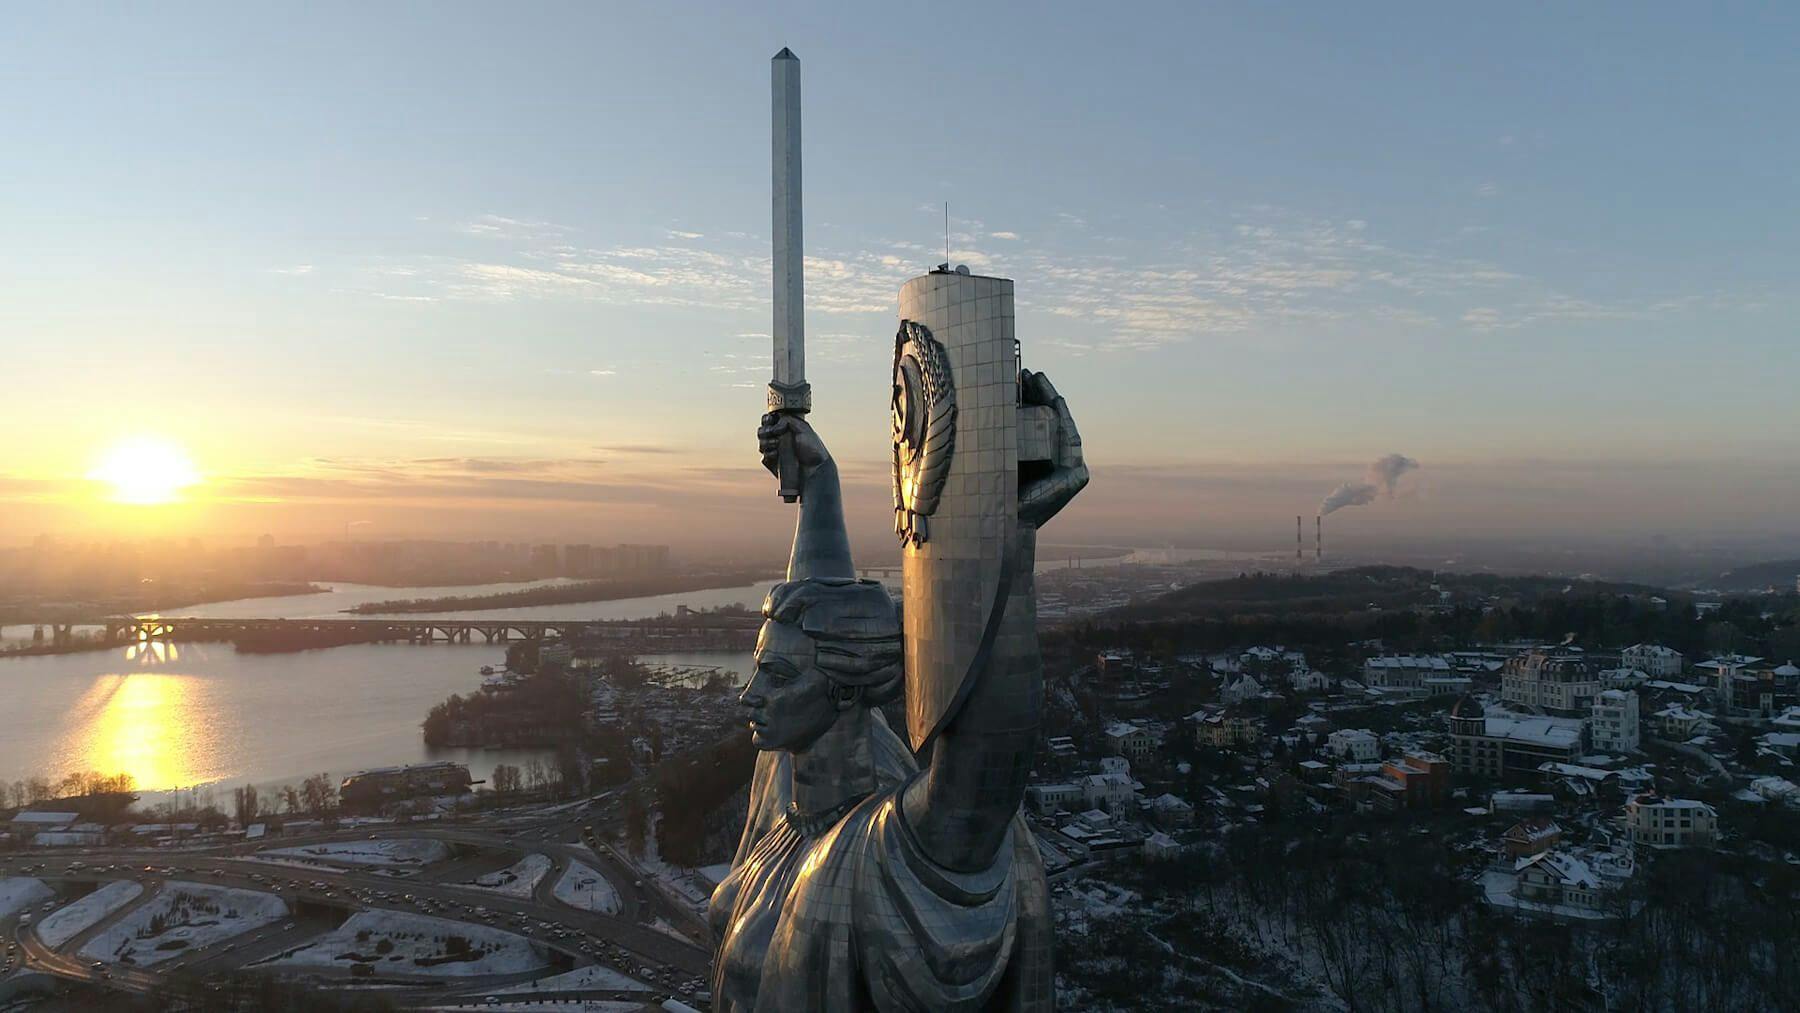 The Motherland Monument in Kyiv, Ukraine, still from "Antagonisms of Memory in Post-Maidan Kyiv" 